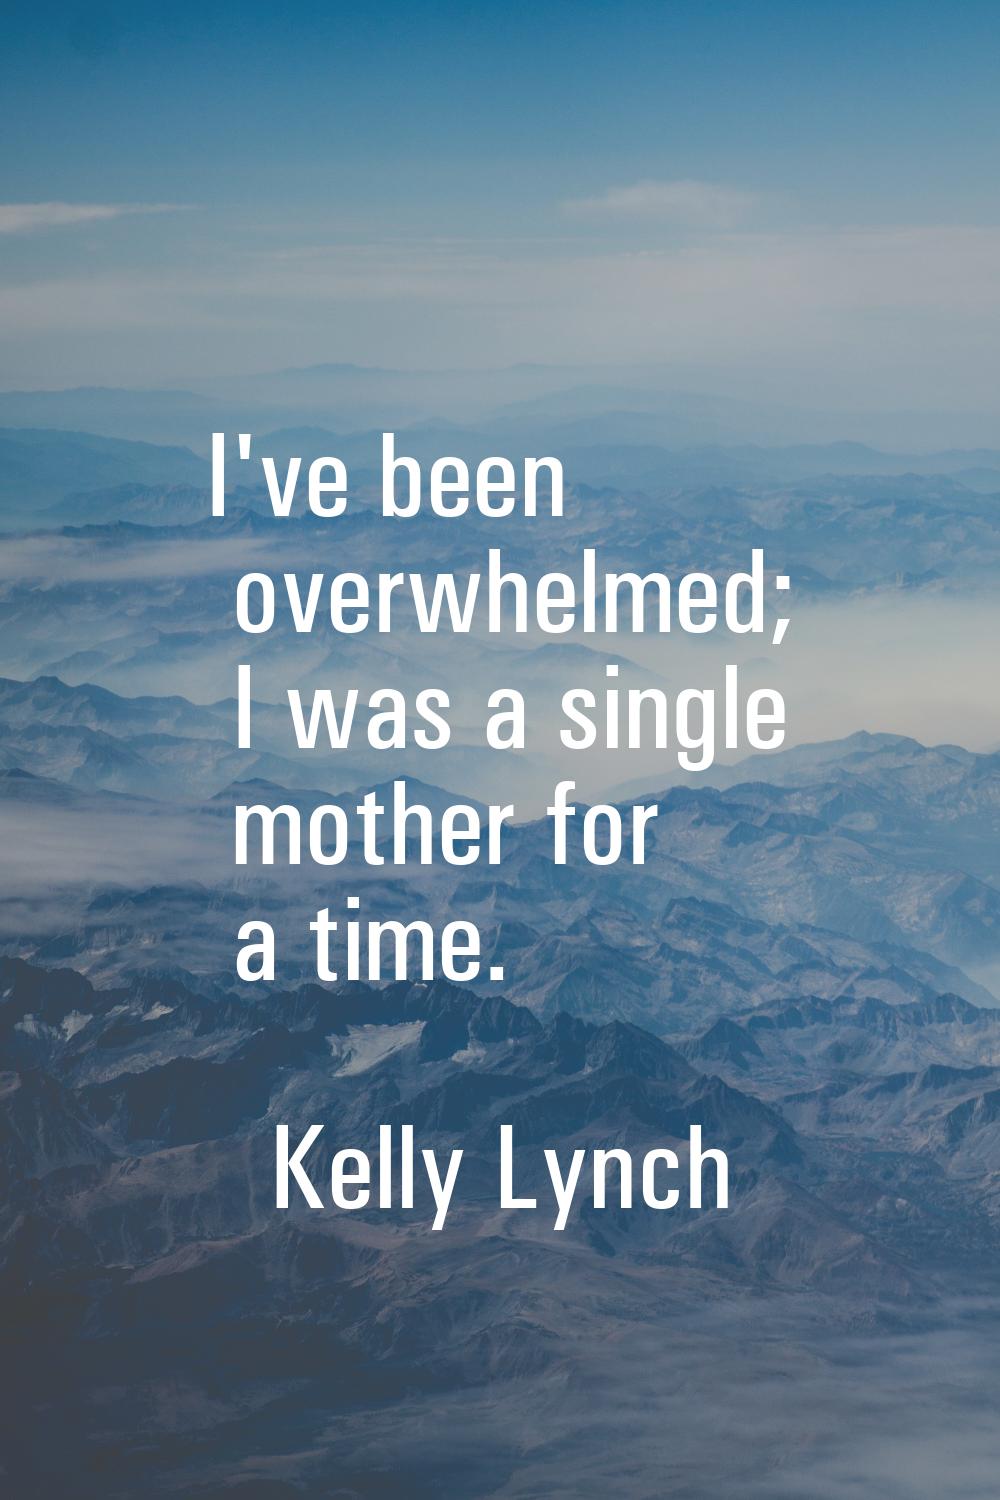 I've been overwhelmed; I was a single mother for a time.